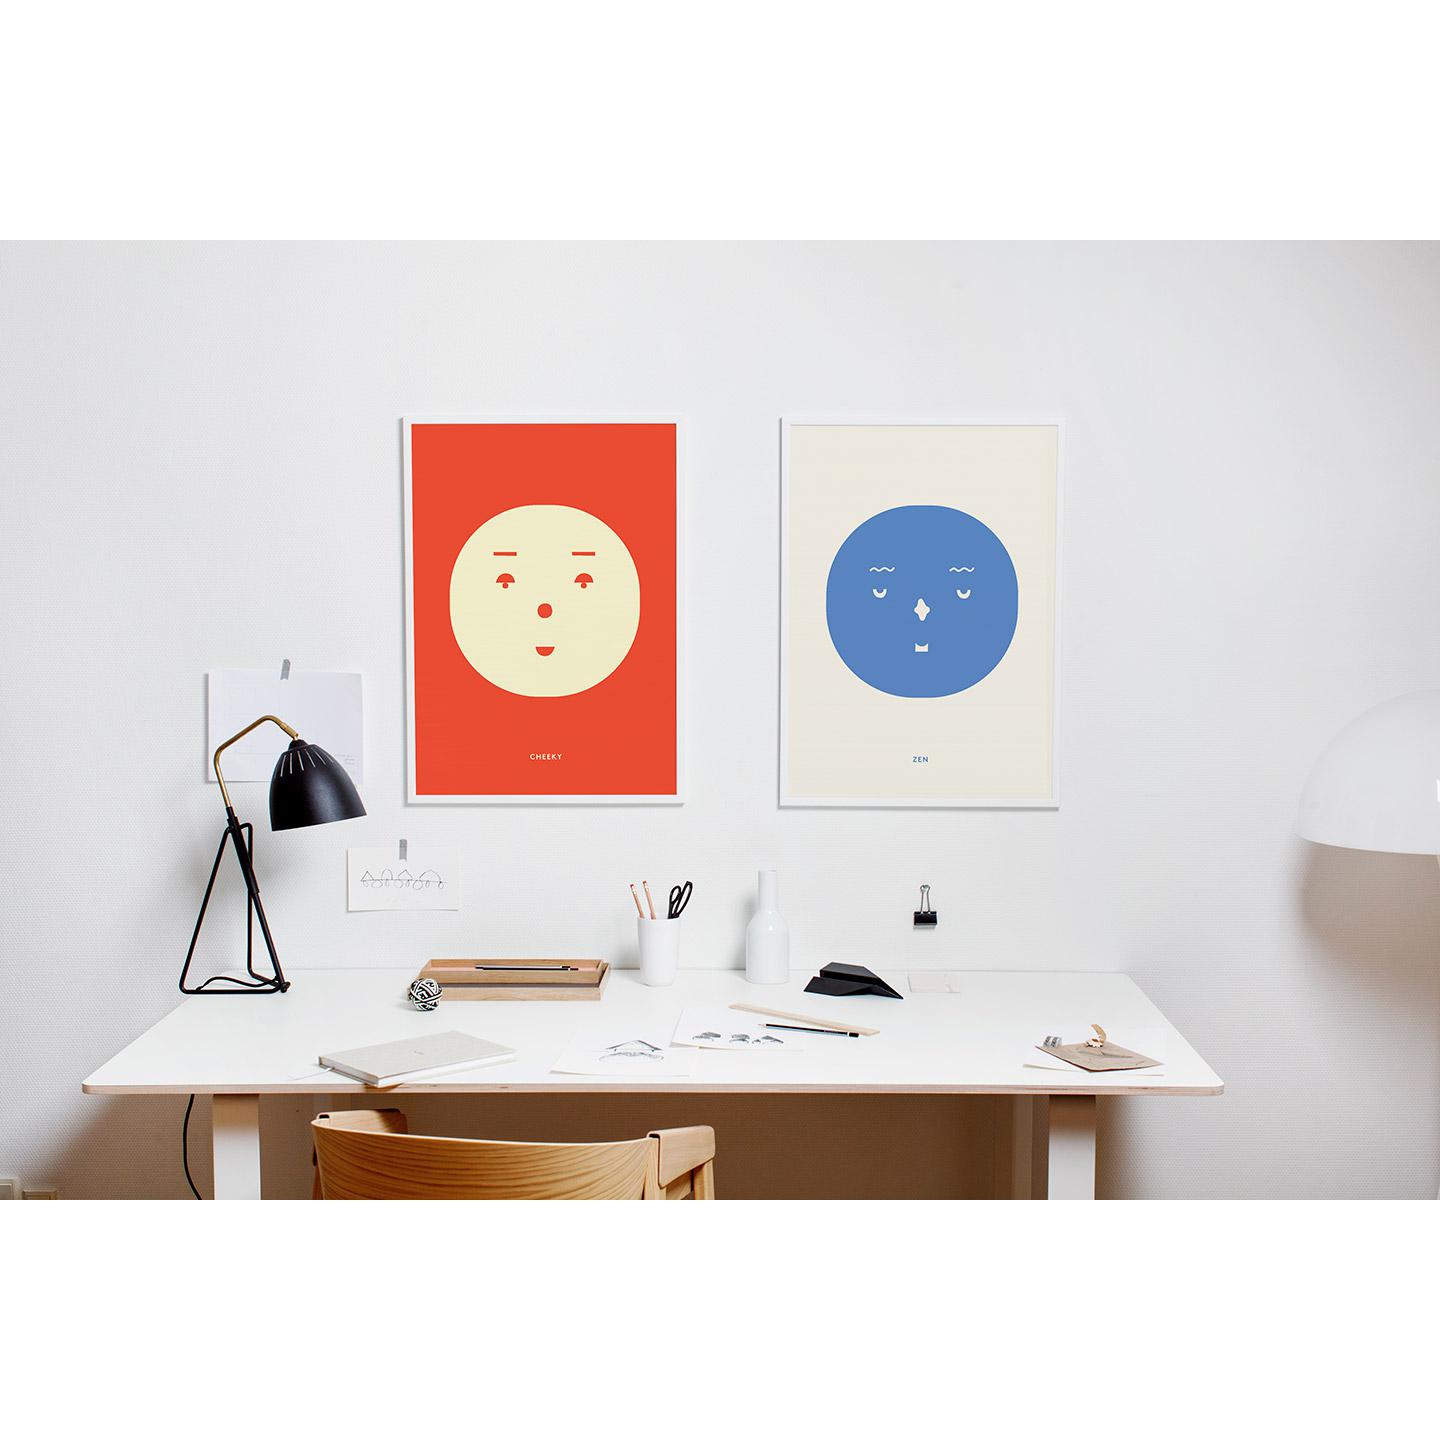 Paper Collective Cheeky Feeling Poster, 50x70 Cm